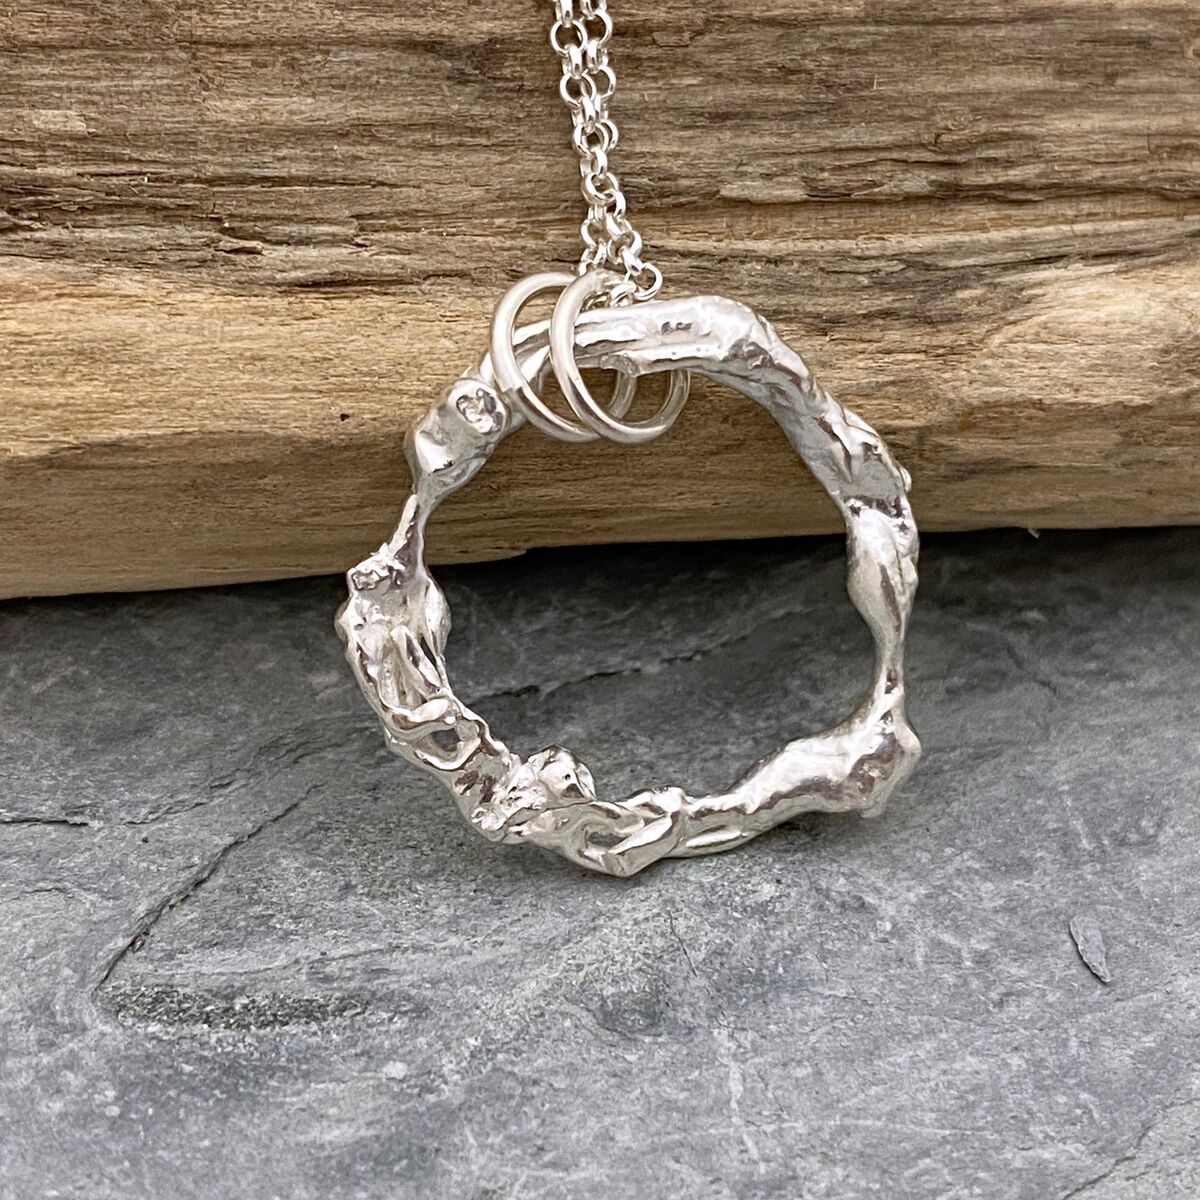 Recycled silver pendant